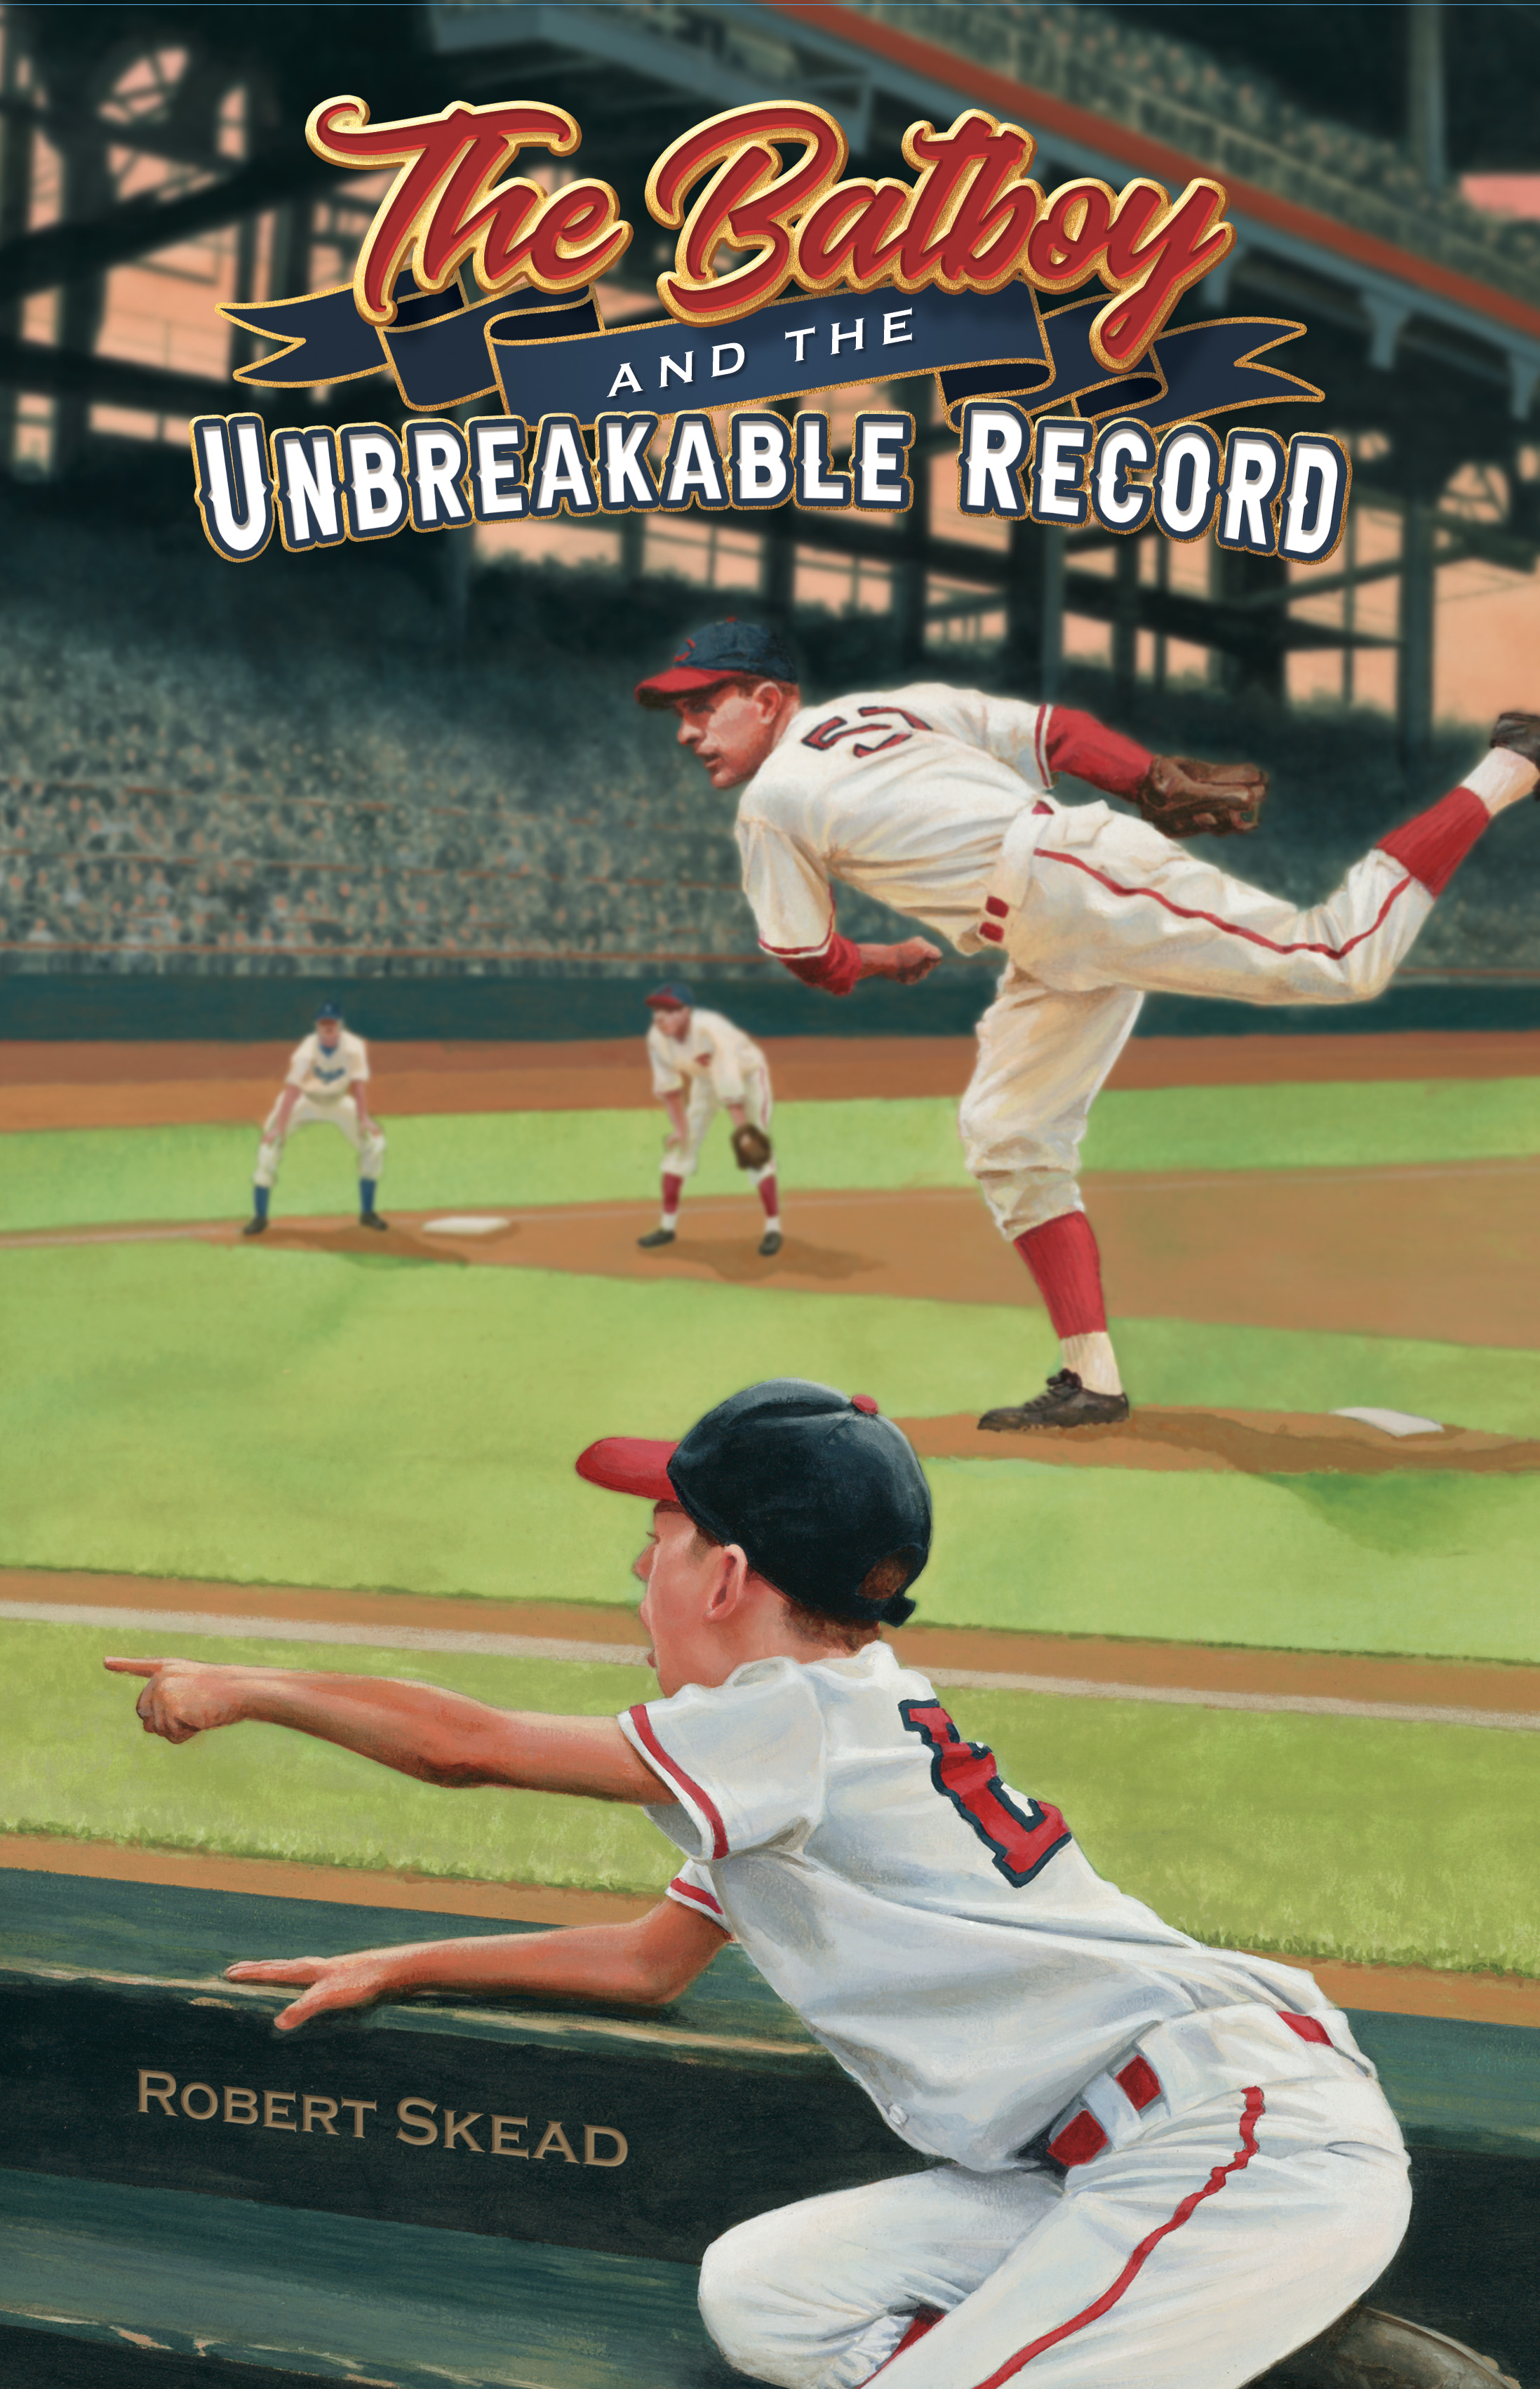 The Batboy and the Unbreakable Record